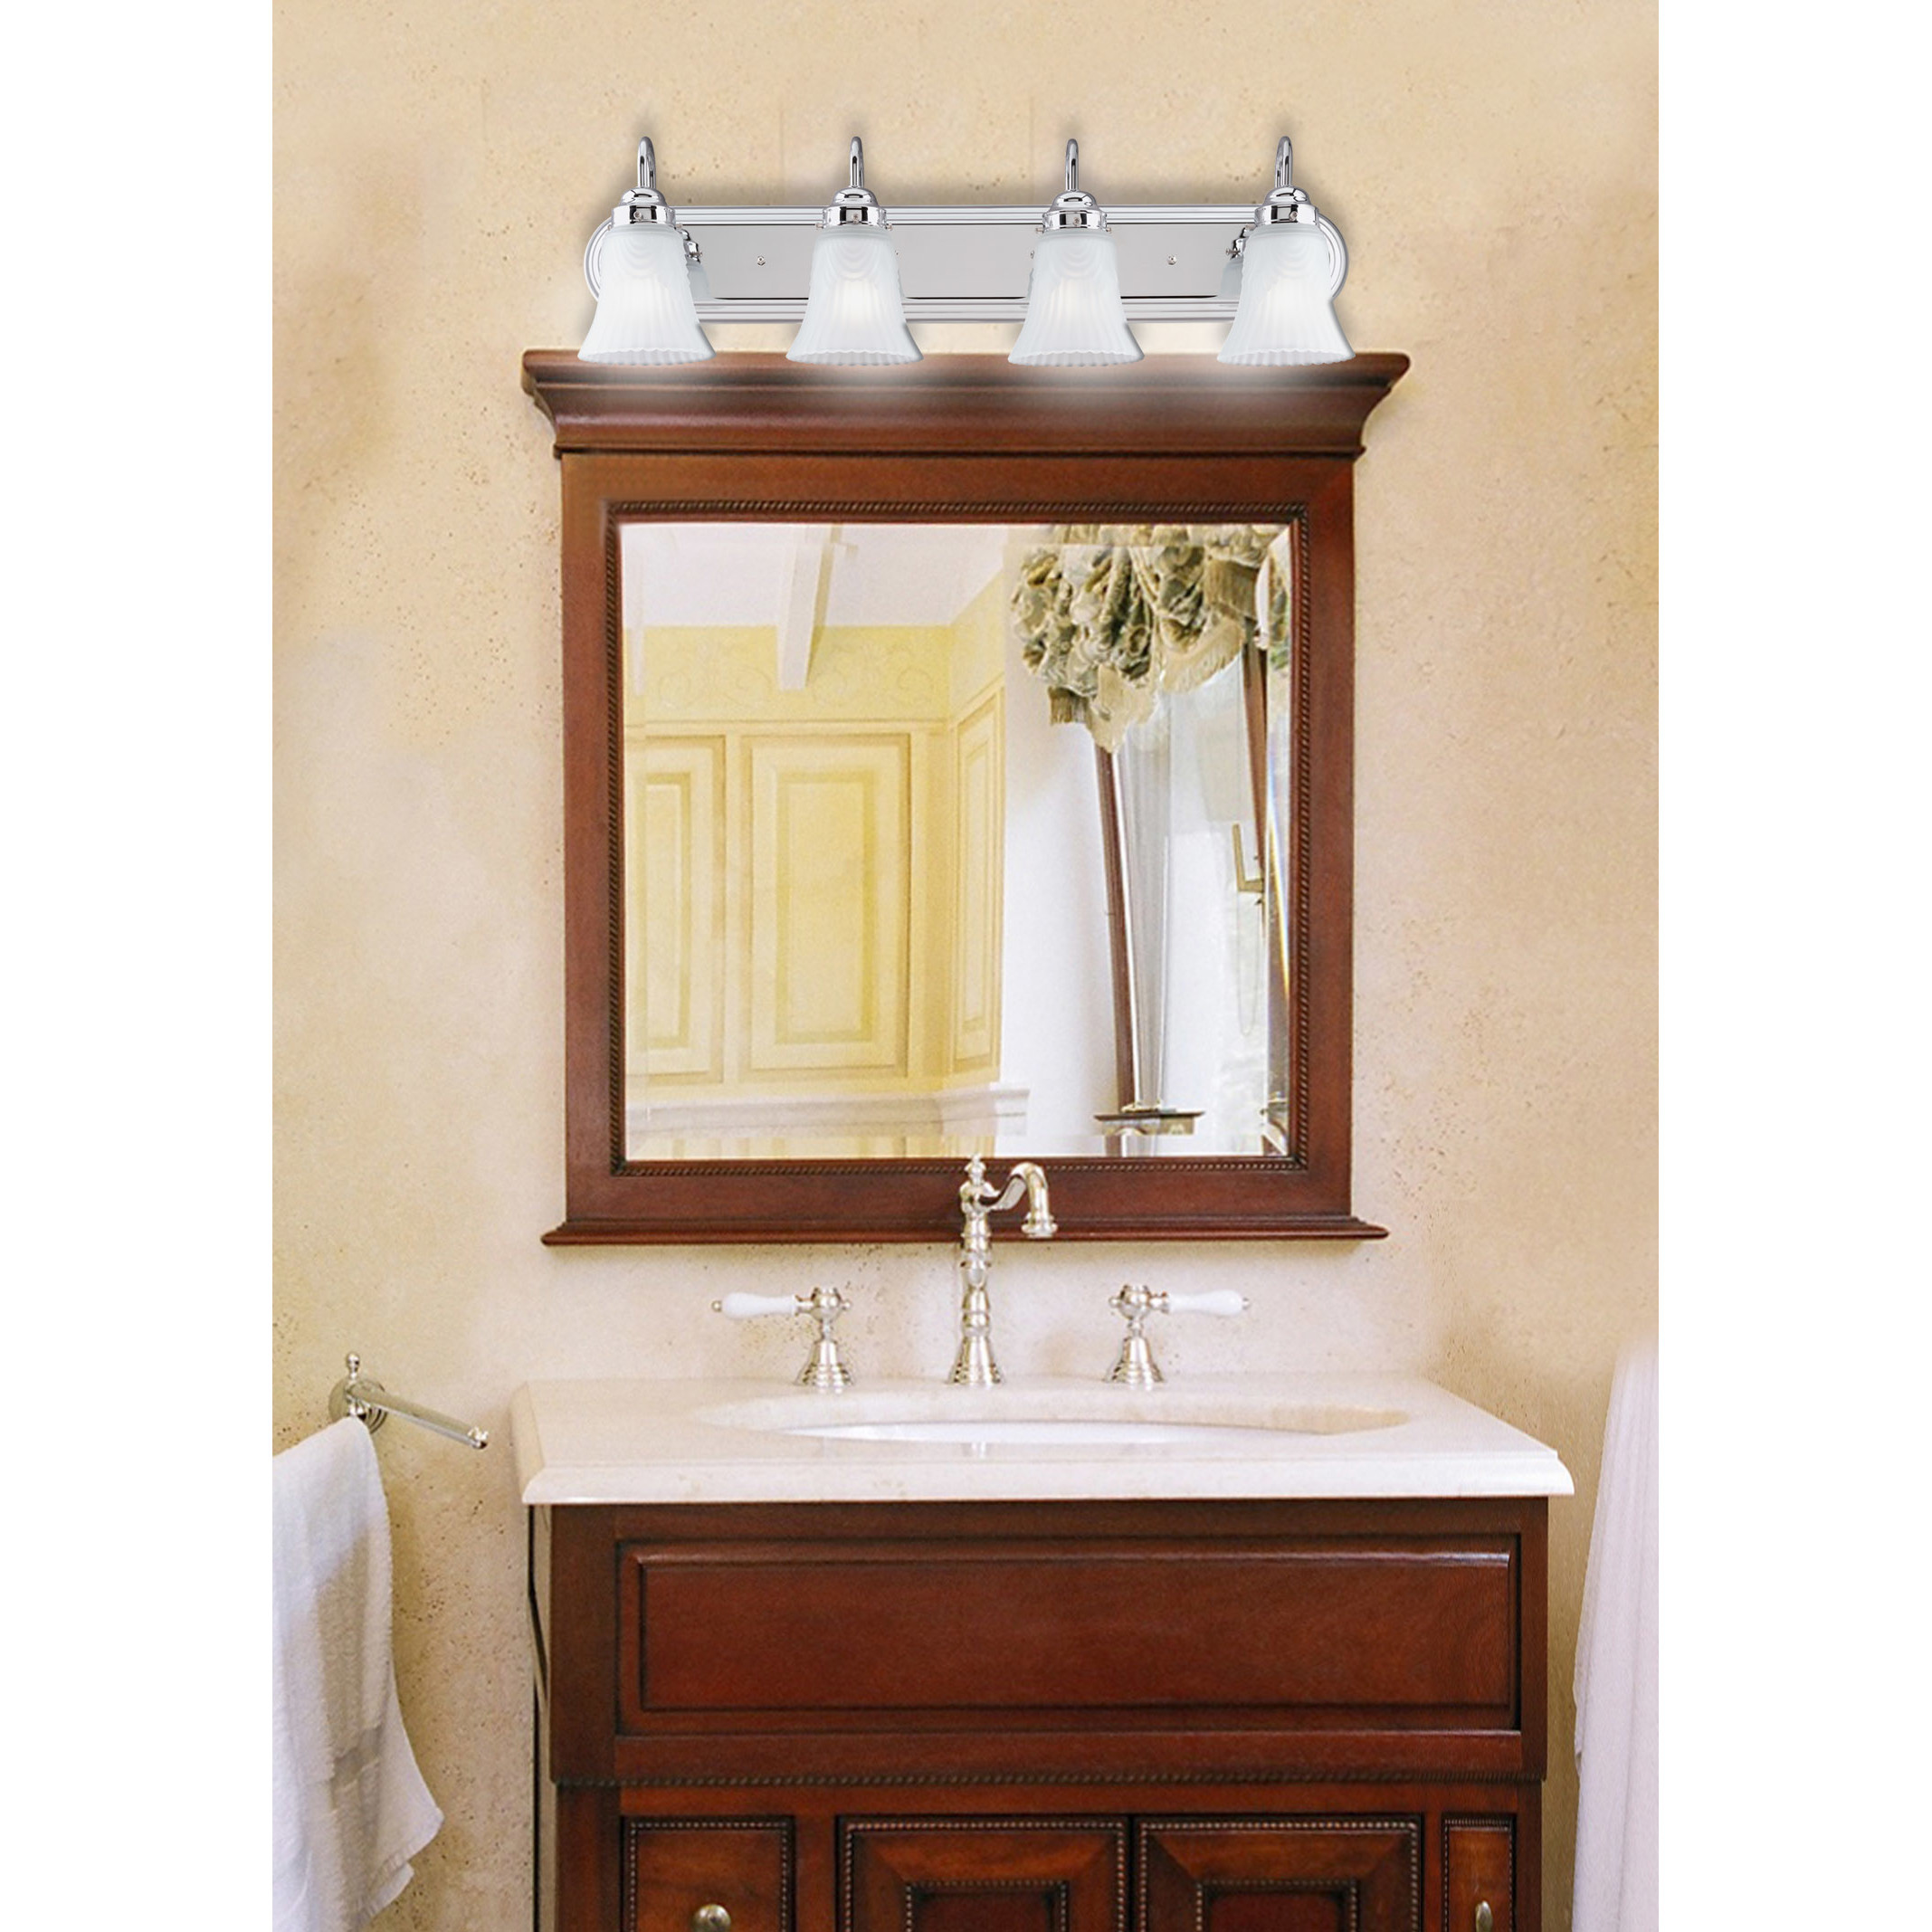 Best ideas about Bathroom Vanity Light
. Save or Pin 4 Light Bathroom Vanity Light Now.